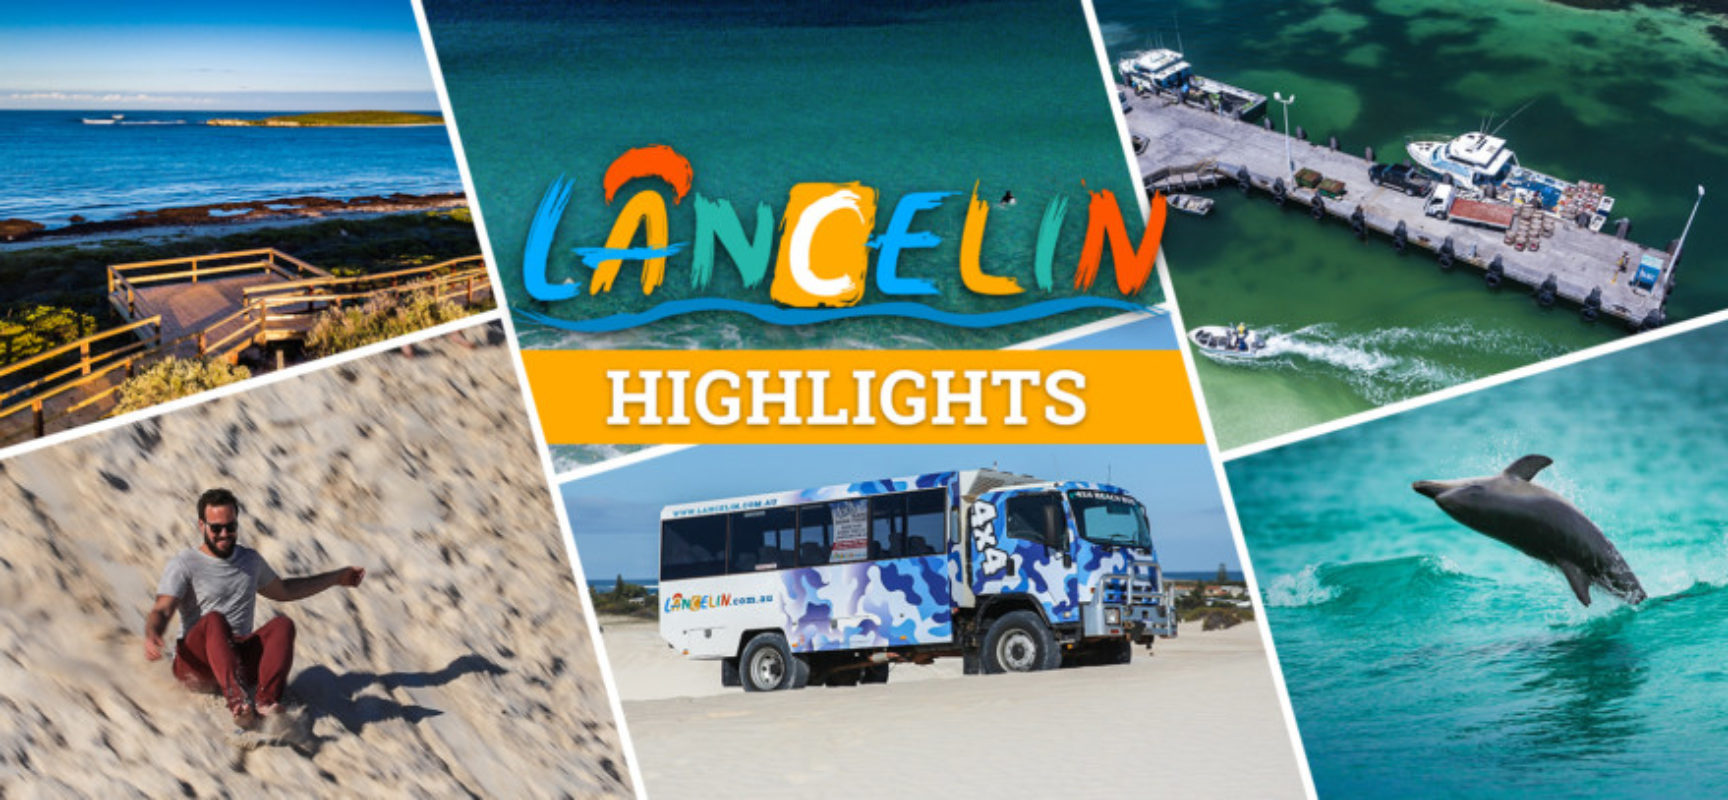 Top 6 Things To Do in Lancelin